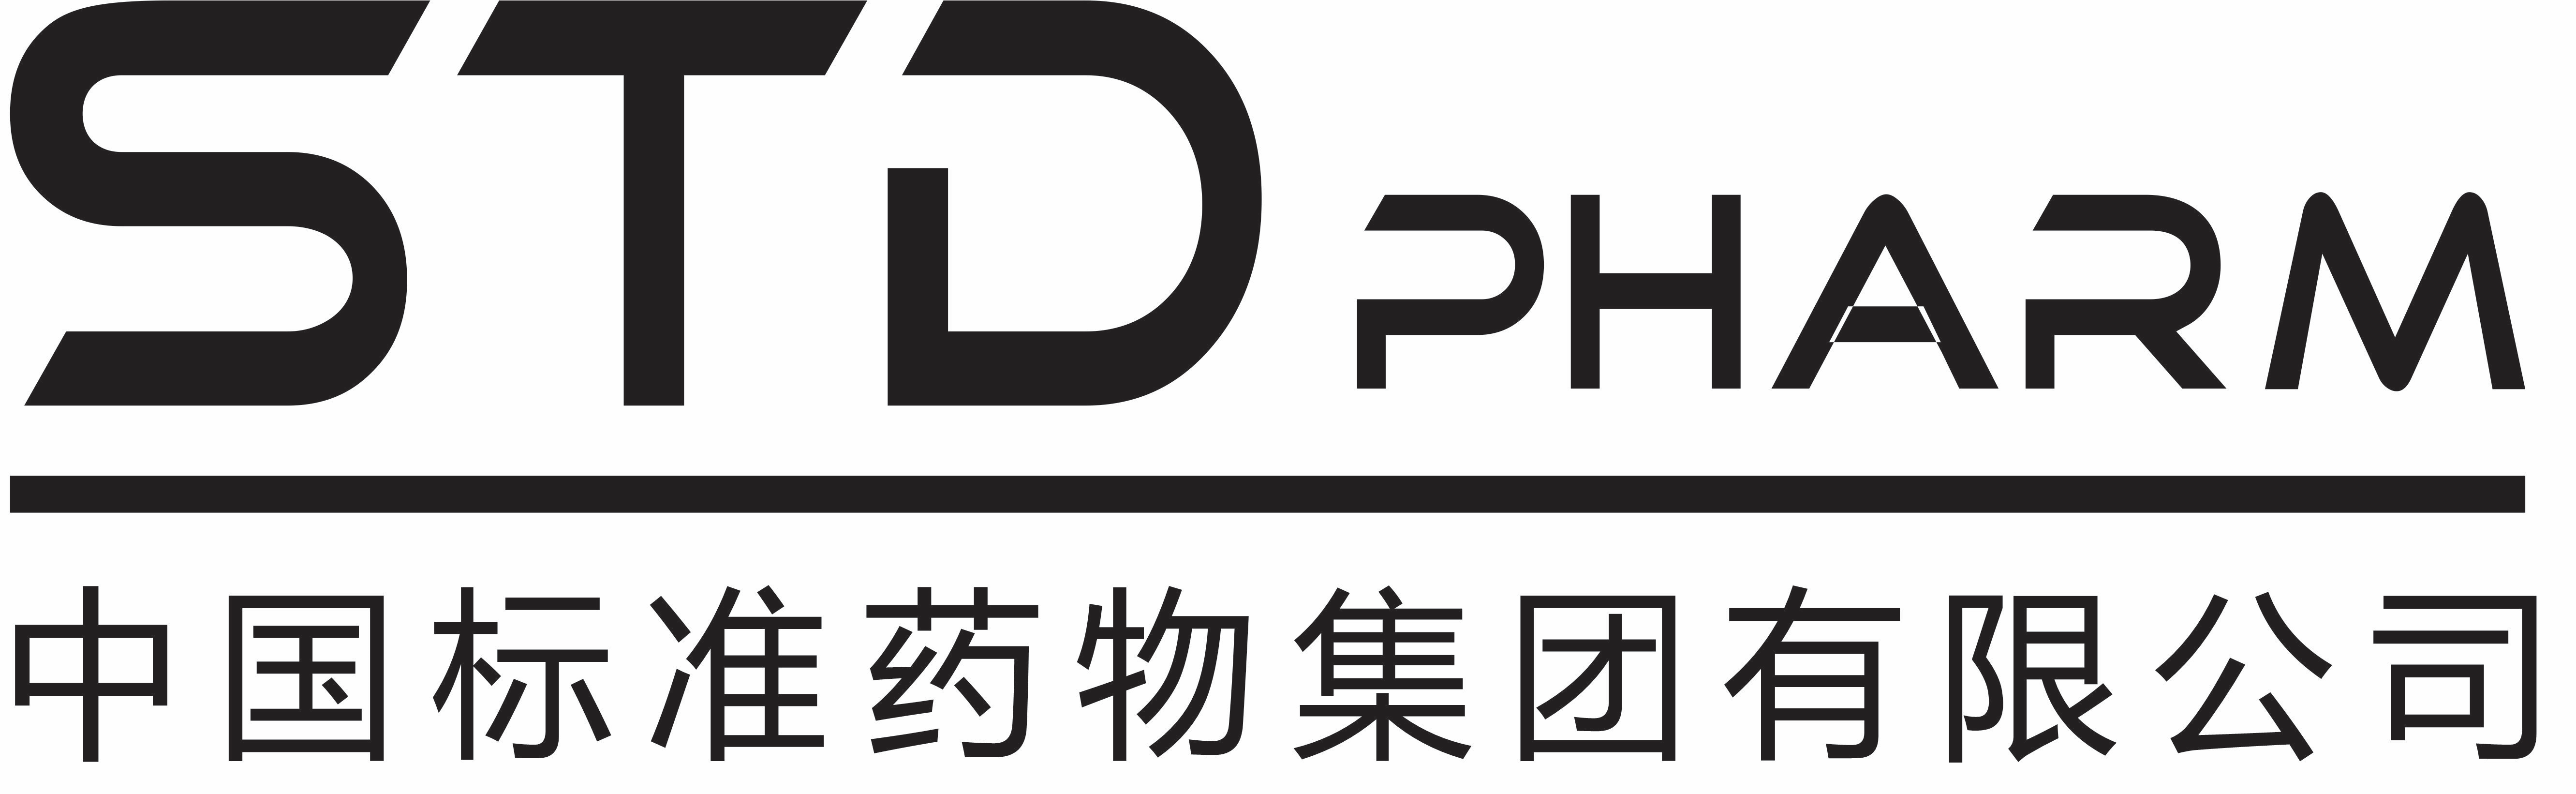 China National Standard Pharmaceutical Corporation Limited